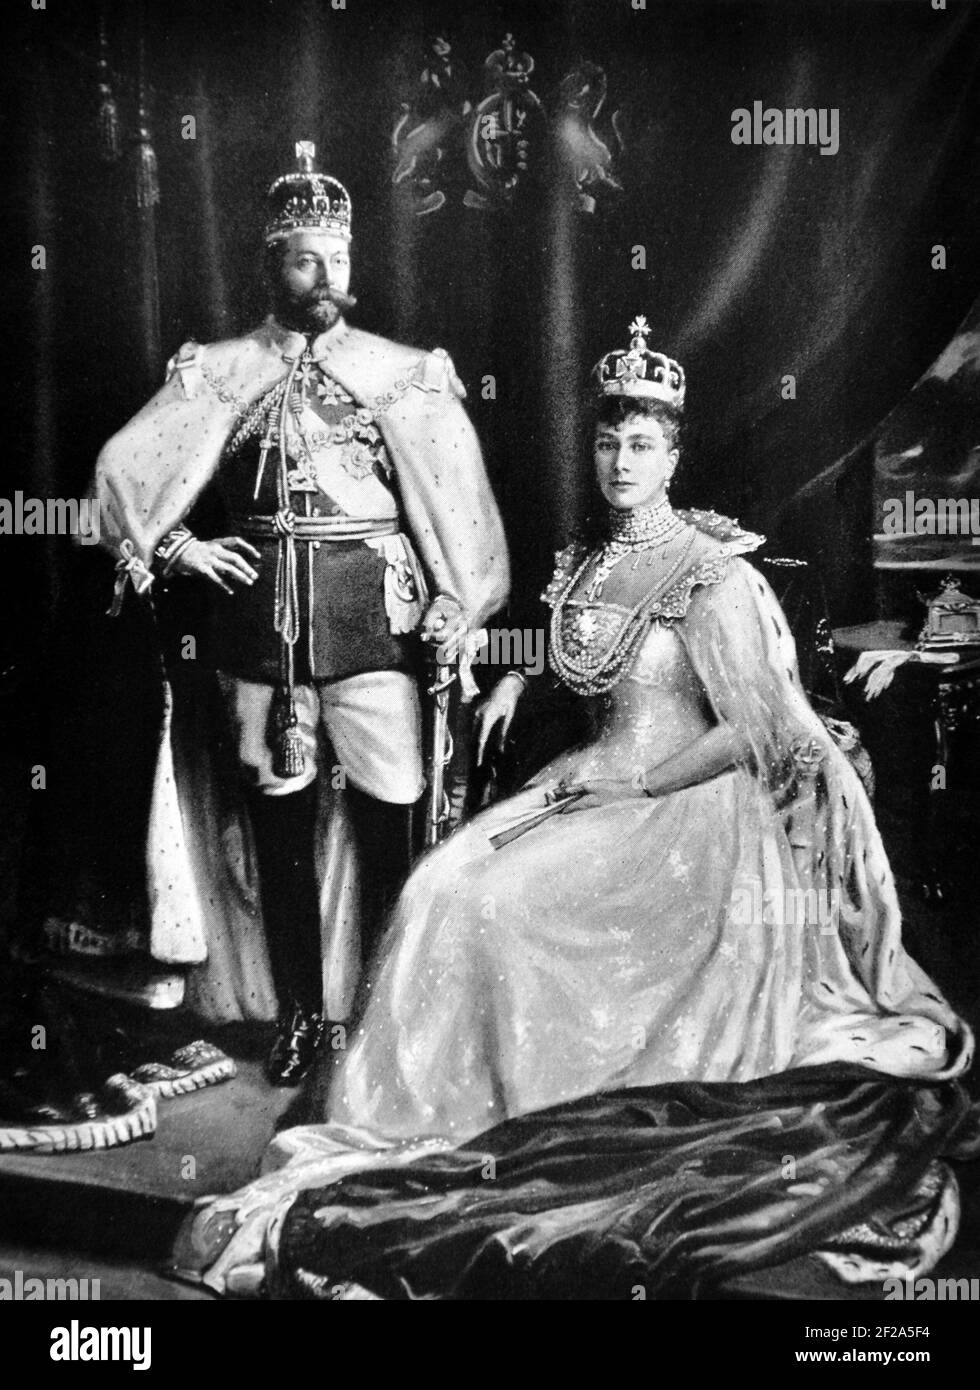 King George V and Queen Mary at the time of their Coronation,  June 1911. From the book: 'FINCHLEY CELEBRATIONS ROYAL SILVER JUBILEE May 1935 Souvenir Handbook'. George V was King of the United Kingdom and the British Dominions, and Emperor of India, from 6 May 1910 until his death in 1936. Mary of Teck was Queen of the United Kingdom and the British Dominions from 1910 until 1936 as the wife of King George V. Stock Photo